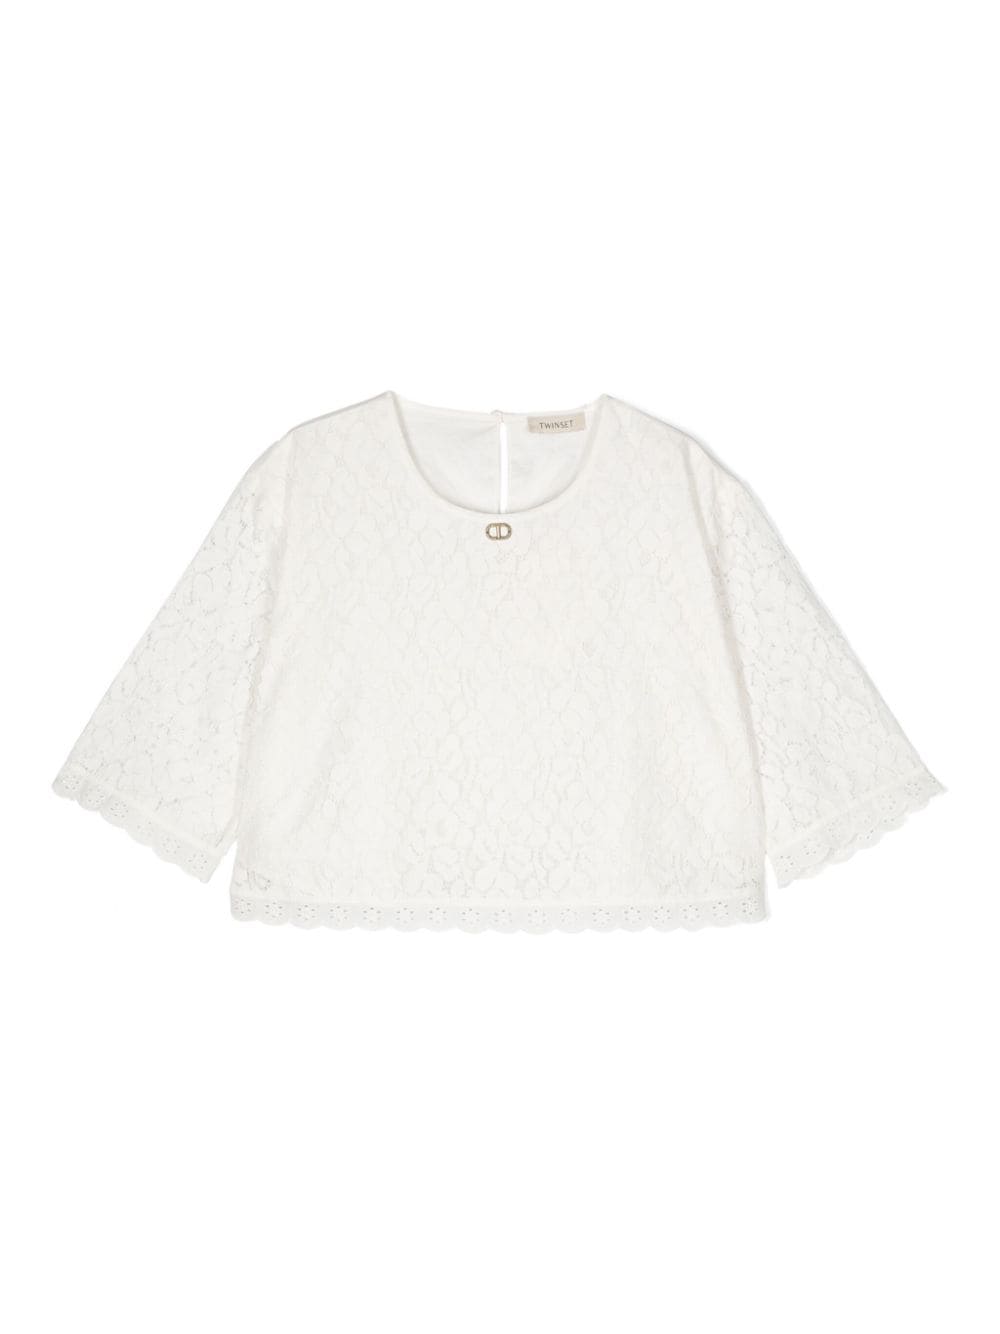 White top for girls with logo plaque